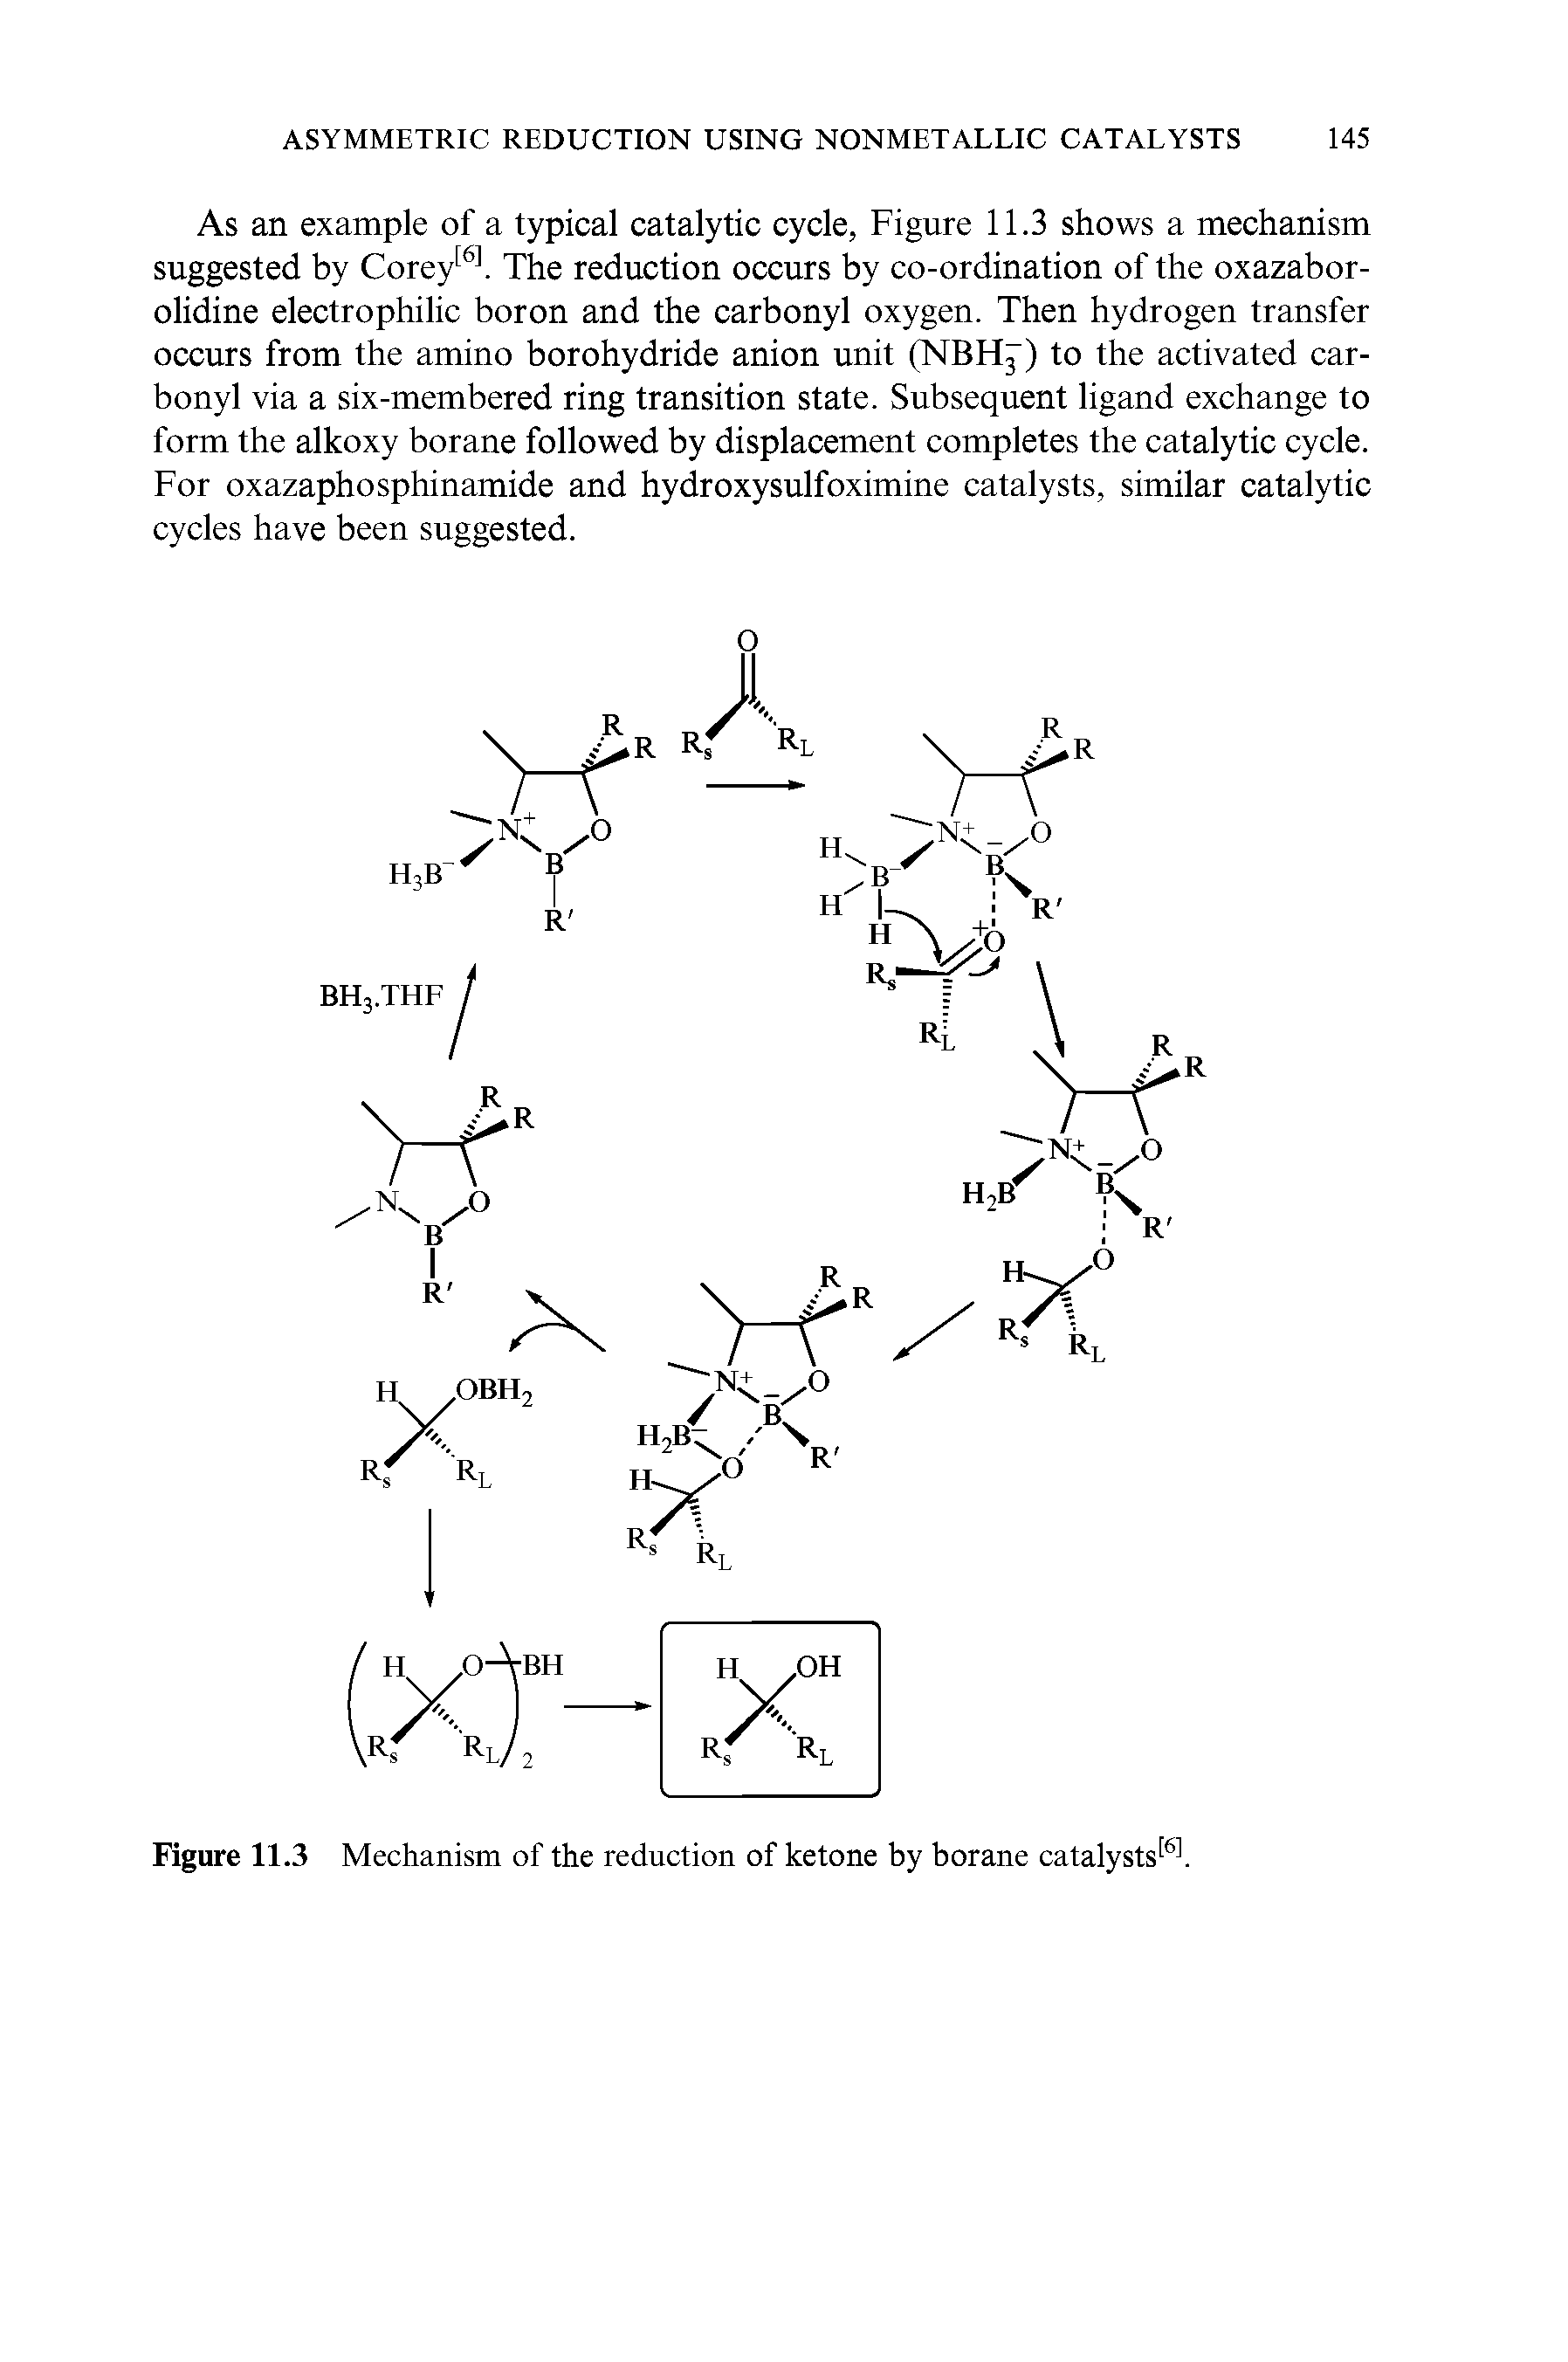 Figure 11.3 Mechanism of the reduction of ketone by borane catalysts. ...